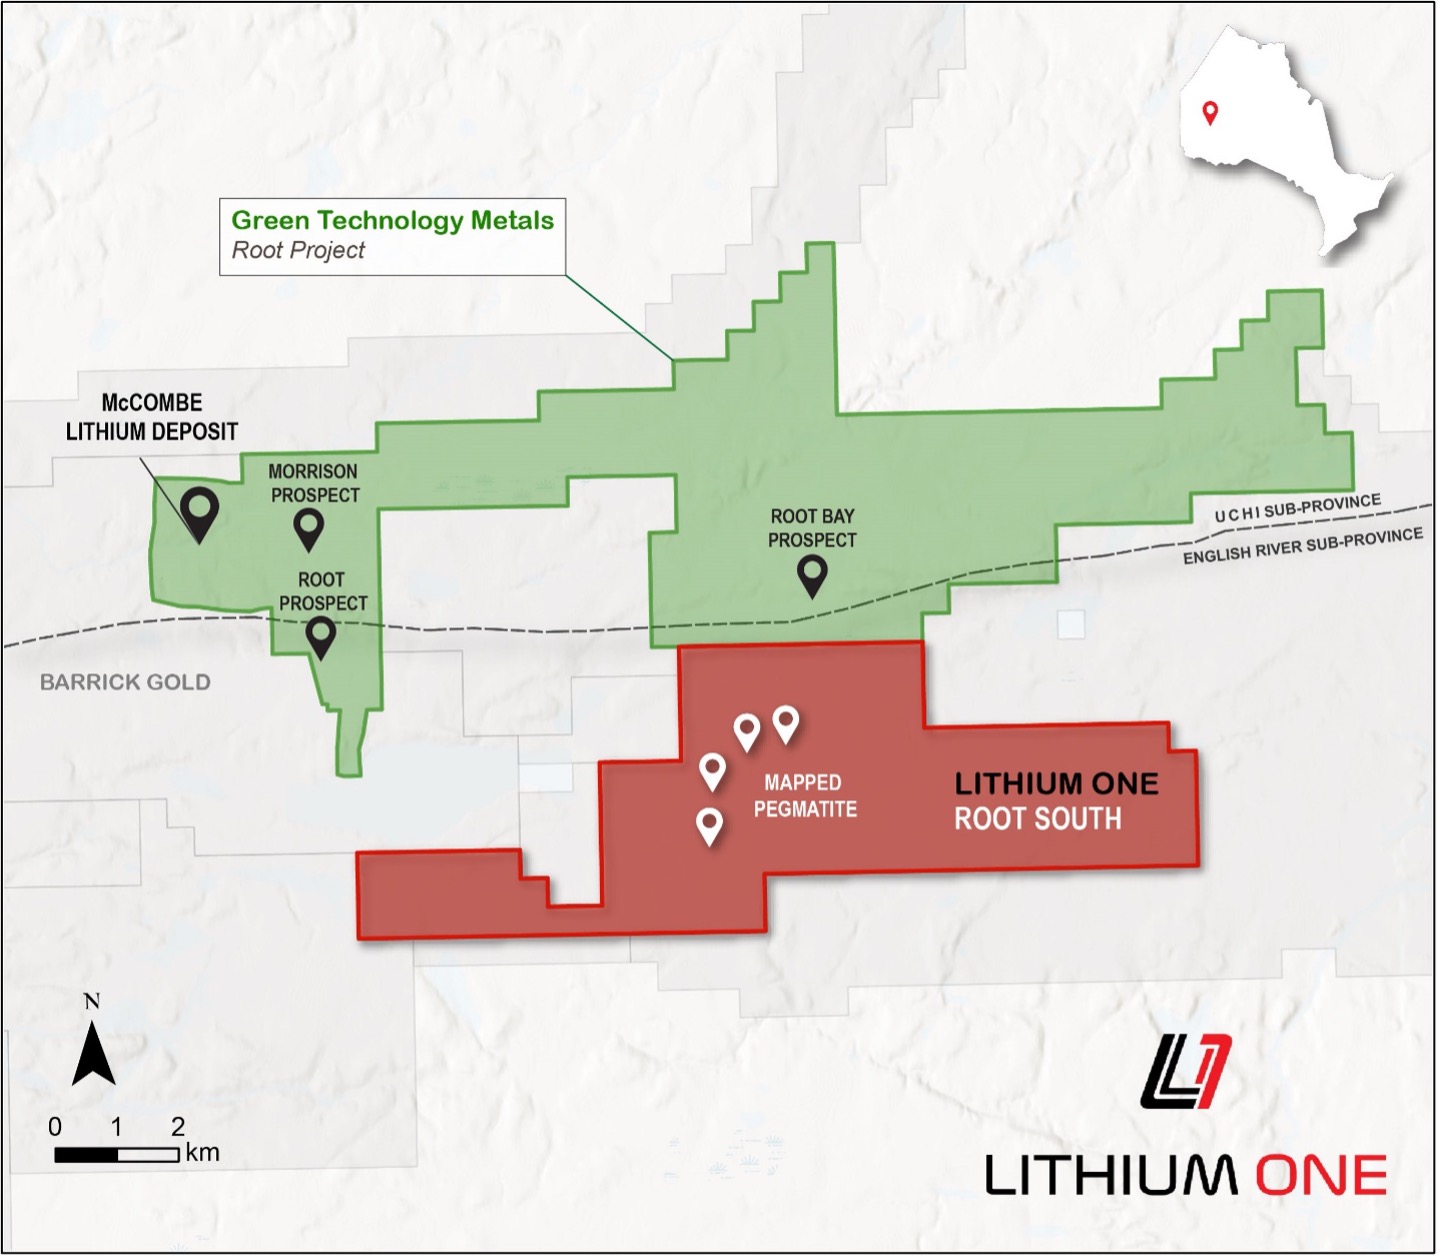 Figure 2. Root South Lithium property map showing the location of mapped pegmatites Green Technology Metal’s Root project.